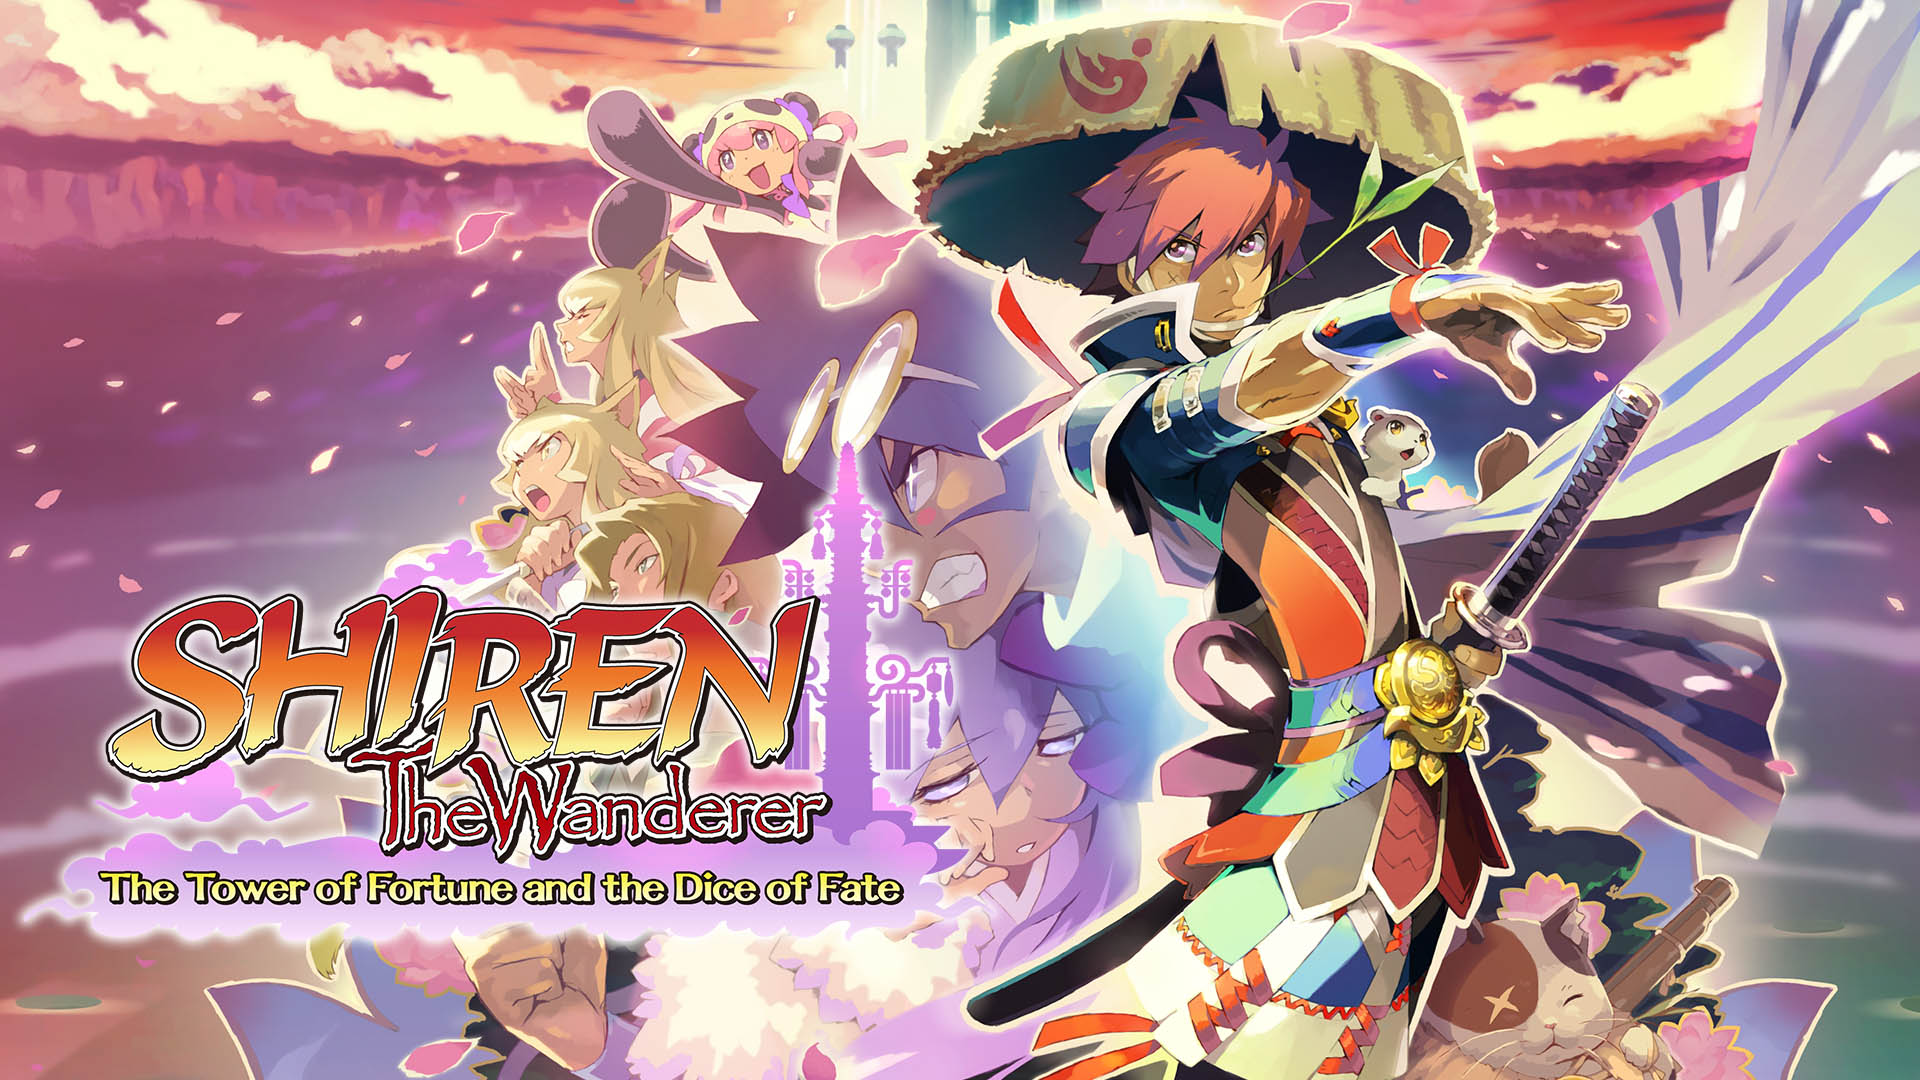 Video Game Shiren the Wanderer: The Tower of Fortune and the Dice of Fate HD Wallpaper | Background Image